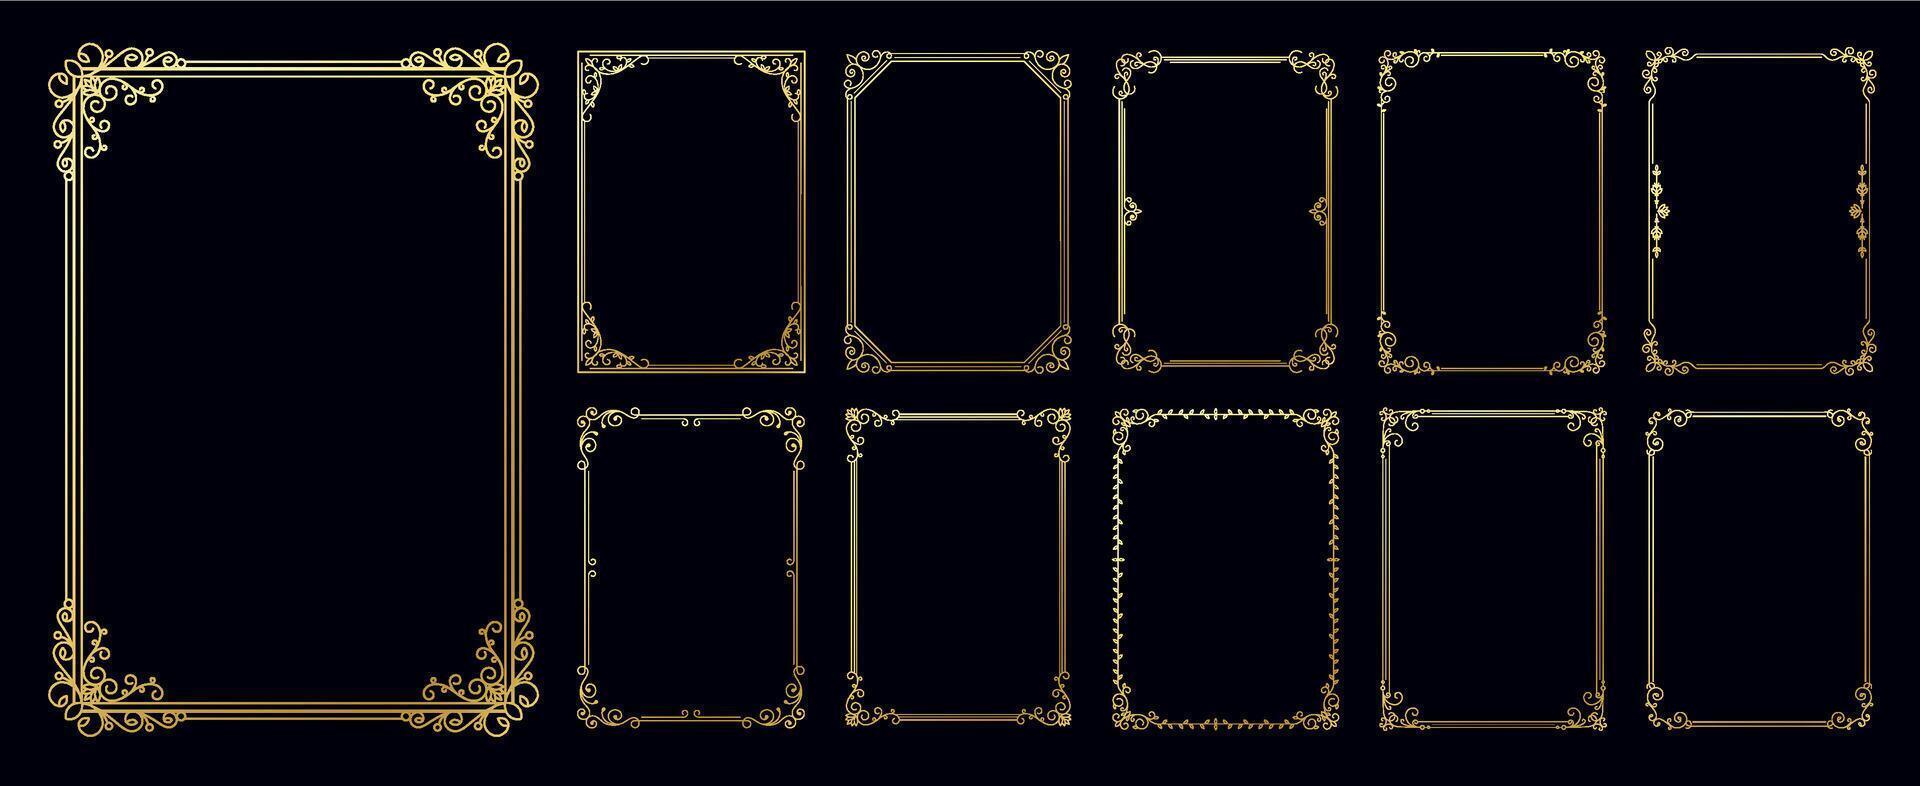 Rococo frames. Elegant decorative a4 frames with flourish swashes and swirls for diploma certificate, wedding invitation and greeting cards. Vector luxury borders